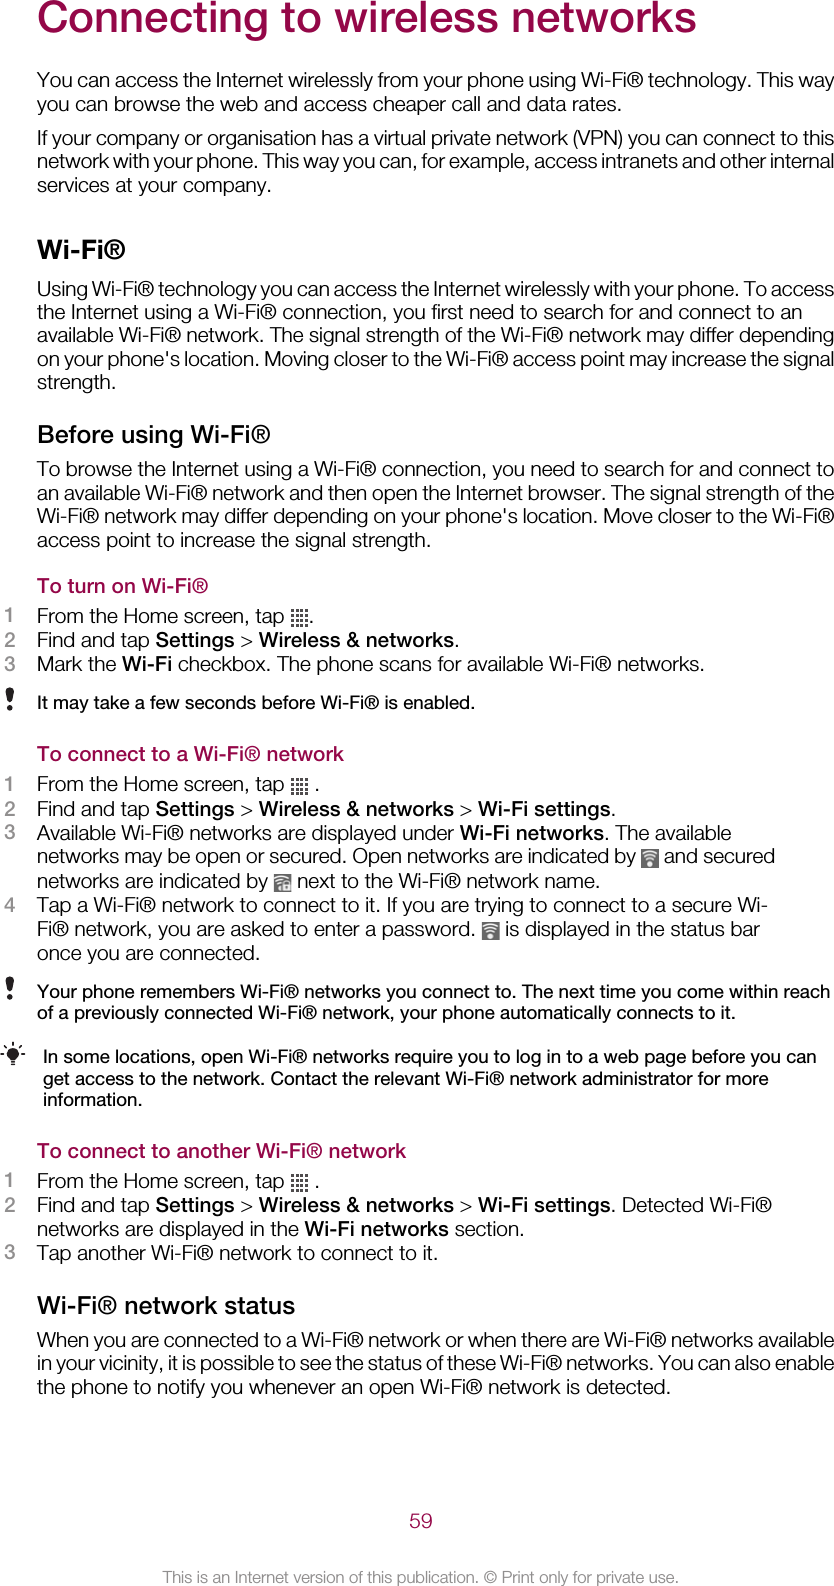 Connecting to wireless networksYou can access the Internet wirelessly from your phone using Wi-Fi® technology. This wayyou can browse the web and access cheaper call and data rates.If your company or organisation has a virtual private network (VPN) you can connect to thisnetwork with your phone. This way you can, for example, access intranets and other internalservices at your company.Wi-Fi®Using Wi-Fi® technology you can access the Internet wirelessly with your phone. To accessthe Internet using a Wi-Fi® connection, you first need to search for and connect to anavailable Wi-Fi® network. The signal strength of the Wi-Fi® network may differ dependingon your phone&apos;s location. Moving closer to the Wi-Fi® access point may increase the signalstrength.Before using Wi-Fi®To browse the Internet using a Wi-Fi® connection, you need to search for and connect toan available Wi-Fi® network and then open the Internet browser. The signal strength of theWi-Fi® network may differ depending on your phone&apos;s location. Move closer to the Wi-Fi®access point to increase the signal strength.To turn on Wi-Fi®1From the Home screen, tap  .2Find and tap Settings &gt; Wireless &amp; networks.3Mark the Wi-Fi checkbox. The phone scans for available Wi-Fi® networks.It may take a few seconds before Wi-Fi® is enabled.To connect to a Wi-Fi® network1From the Home screen, tap   .2Find and tap Settings &gt; Wireless &amp; networks &gt; Wi-Fi settings.3Available Wi-Fi® networks are displayed under Wi-Fi networks. The availablenetworks may be open or secured. Open networks are indicated by   and securednetworks are indicated by   next to the Wi-Fi® network name.4Tap a Wi-Fi® network to connect to it. If you are trying to connect to a secure Wi-Fi® network, you are asked to enter a password.   is displayed in the status baronce you are connected.Your phone remembers Wi-Fi® networks you connect to. The next time you come within reachof a previously connected Wi-Fi® network, your phone automatically connects to it.In some locations, open Wi-Fi® networks require you to log in to a web page before you canget access to the network. Contact the relevant Wi-Fi® network administrator for moreinformation.To connect to another Wi-Fi® network1From the Home screen, tap   .2Find and tap Settings &gt; Wireless &amp; networks &gt; Wi-Fi settings. Detected Wi-Fi®networks are displayed in the Wi-Fi networks section.3Tap another Wi-Fi® network to connect to it.Wi-Fi® network statusWhen you are connected to a Wi-Fi® network or when there are Wi-Fi® networks availablein your vicinity, it is possible to see the status of these Wi-Fi® networks. You can also enablethe phone to notify you whenever an open Wi-Fi® network is detected.59This is an Internet version of this publication. © Print only for private use.